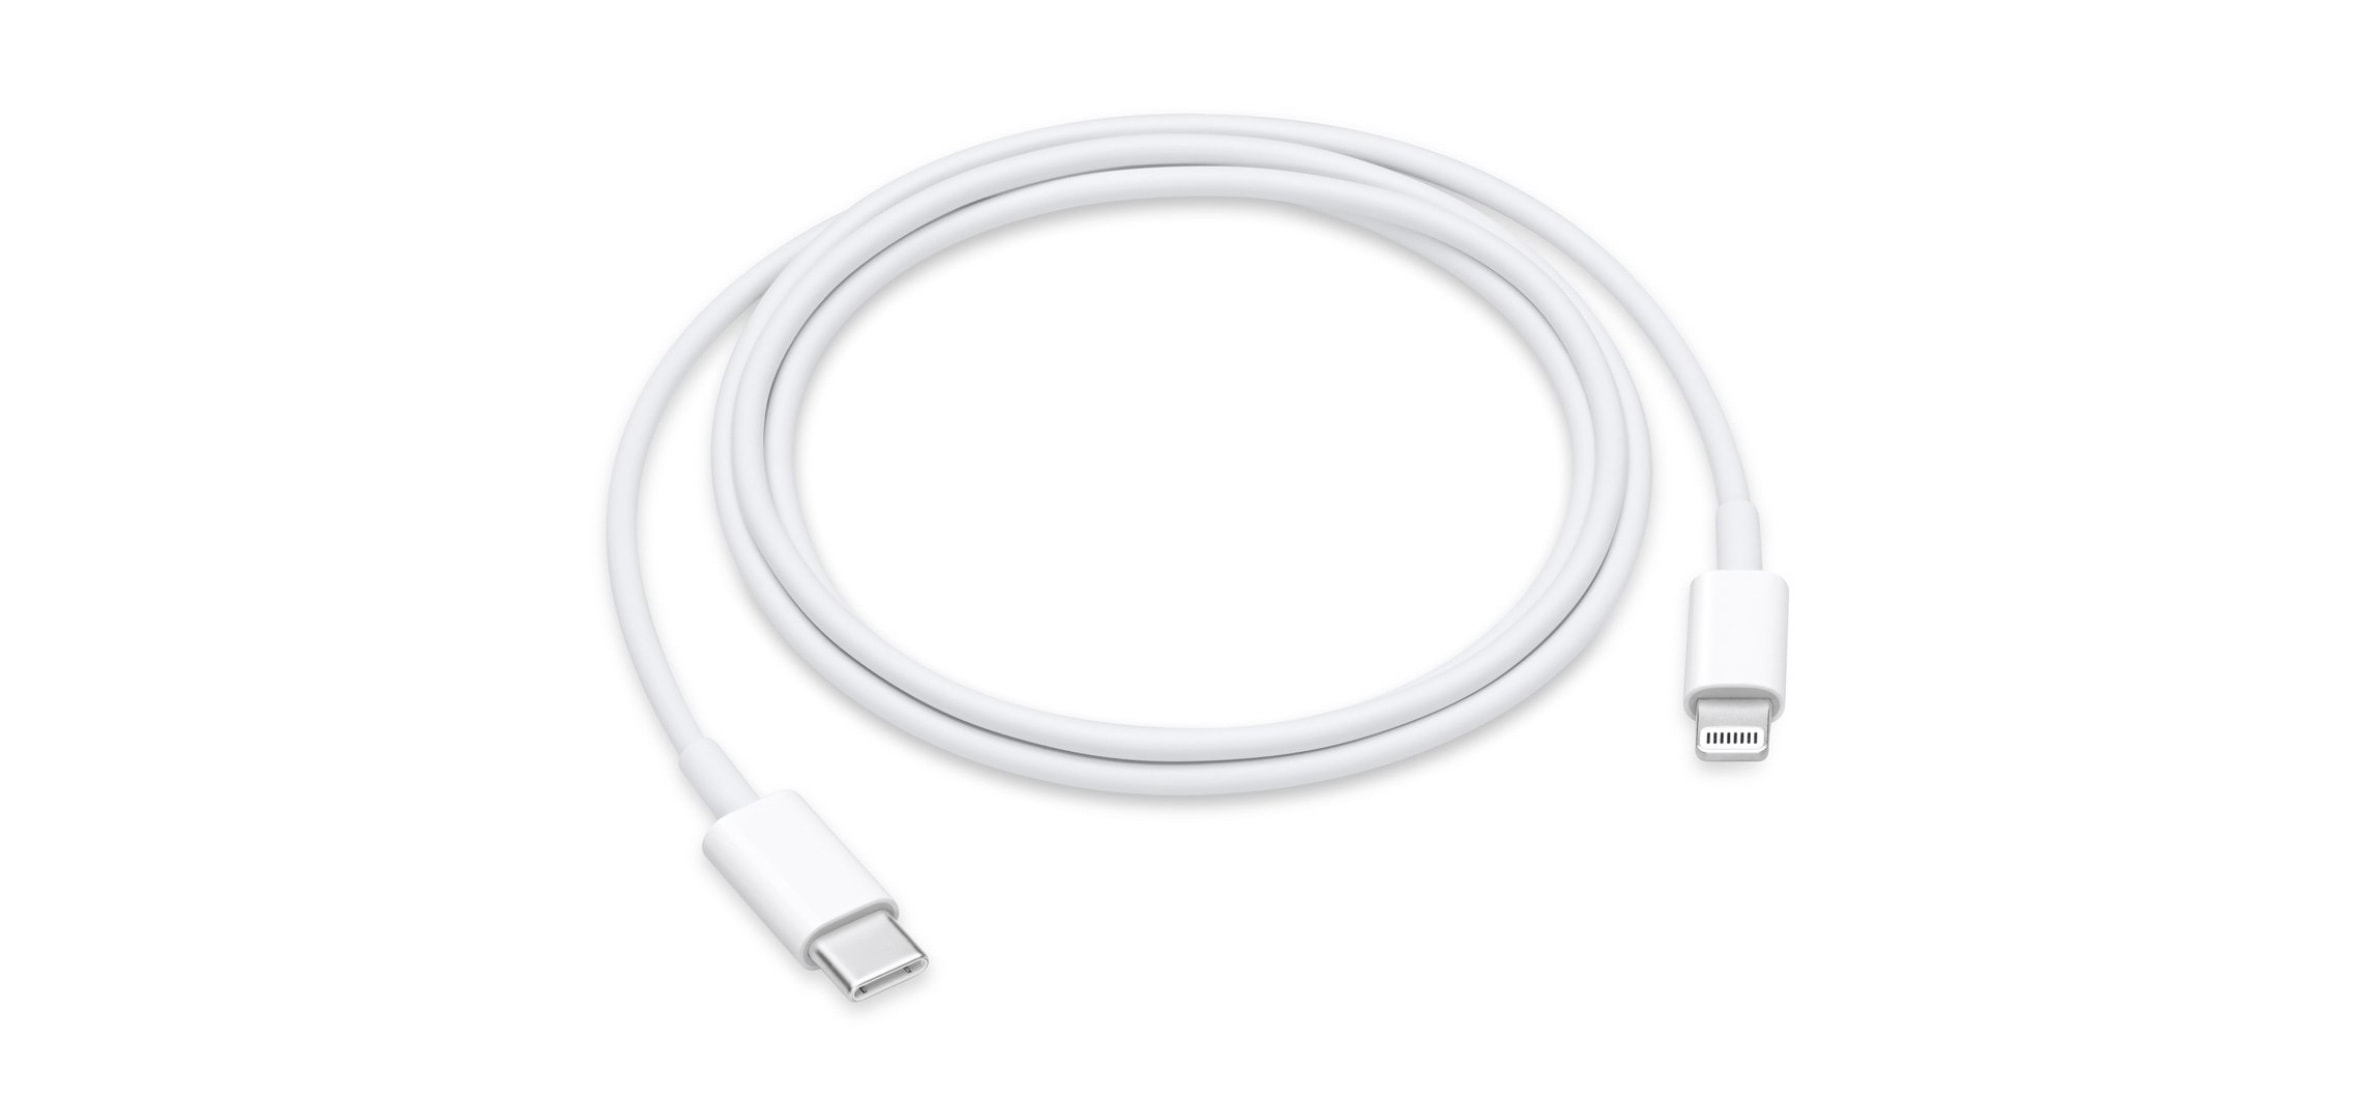 Lightning cables that plug into USB-C ports charge your iPhone more quickly.